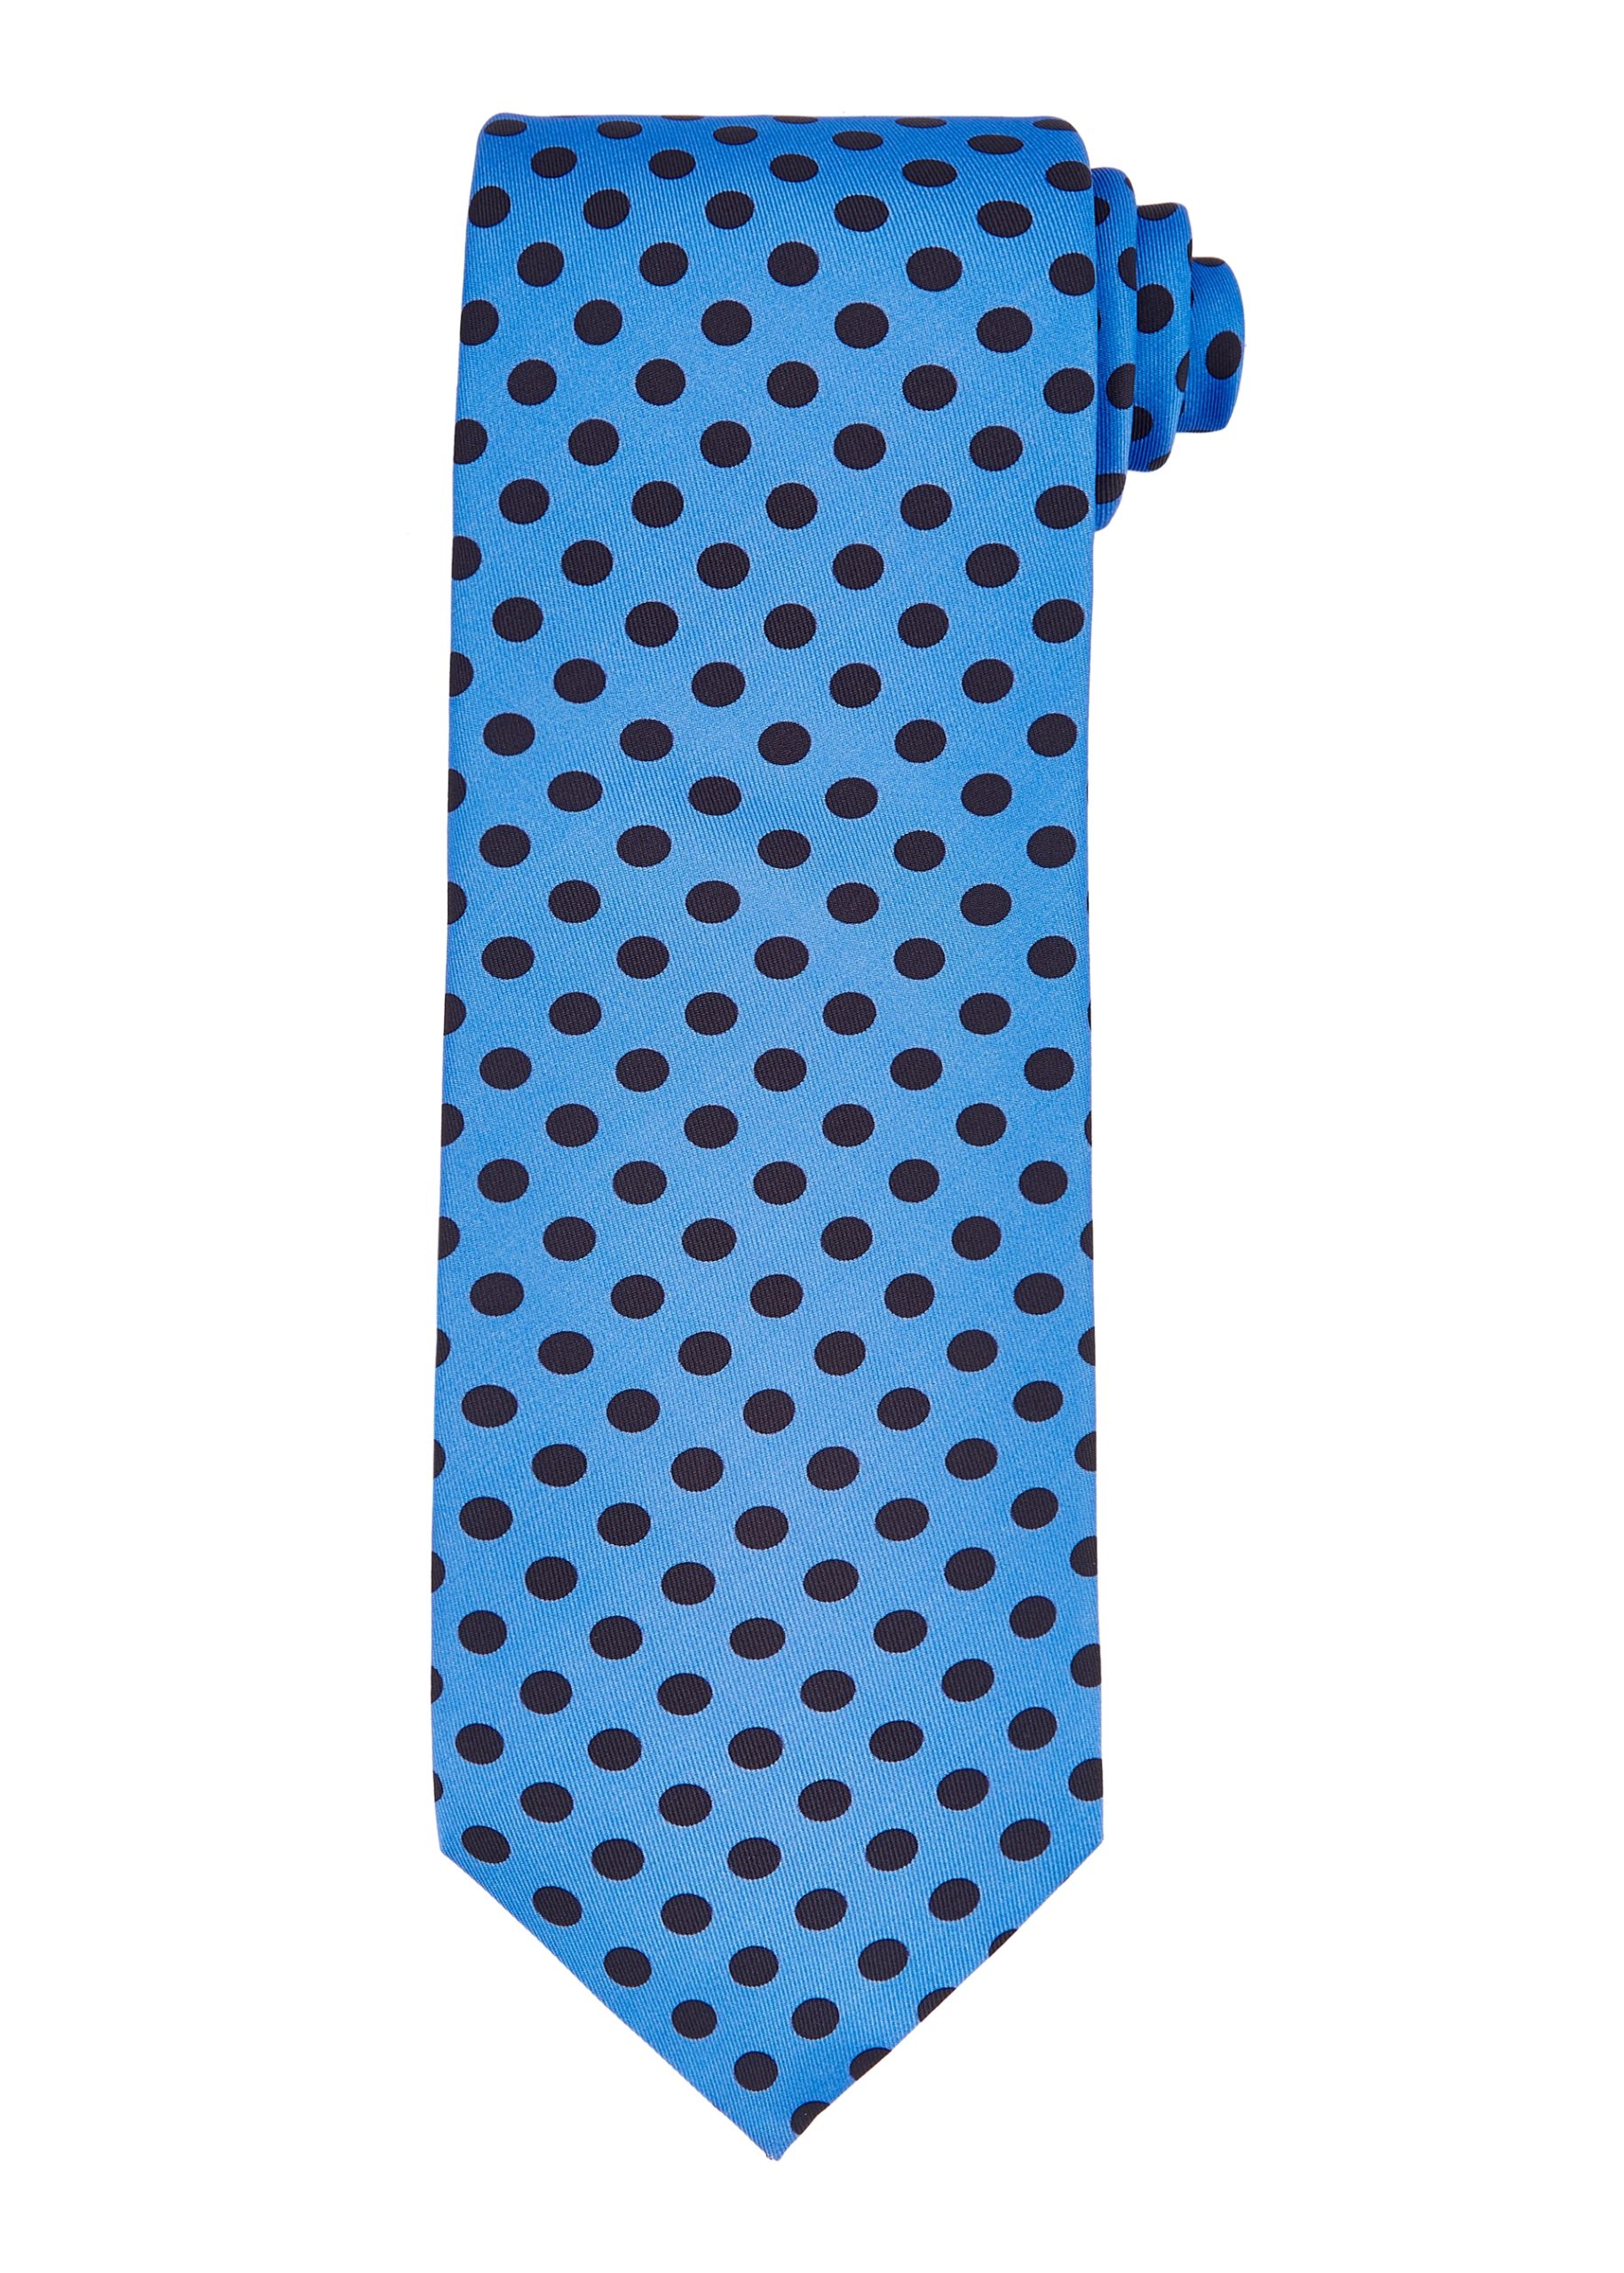 A men’s blue silk tie with large navy spots.